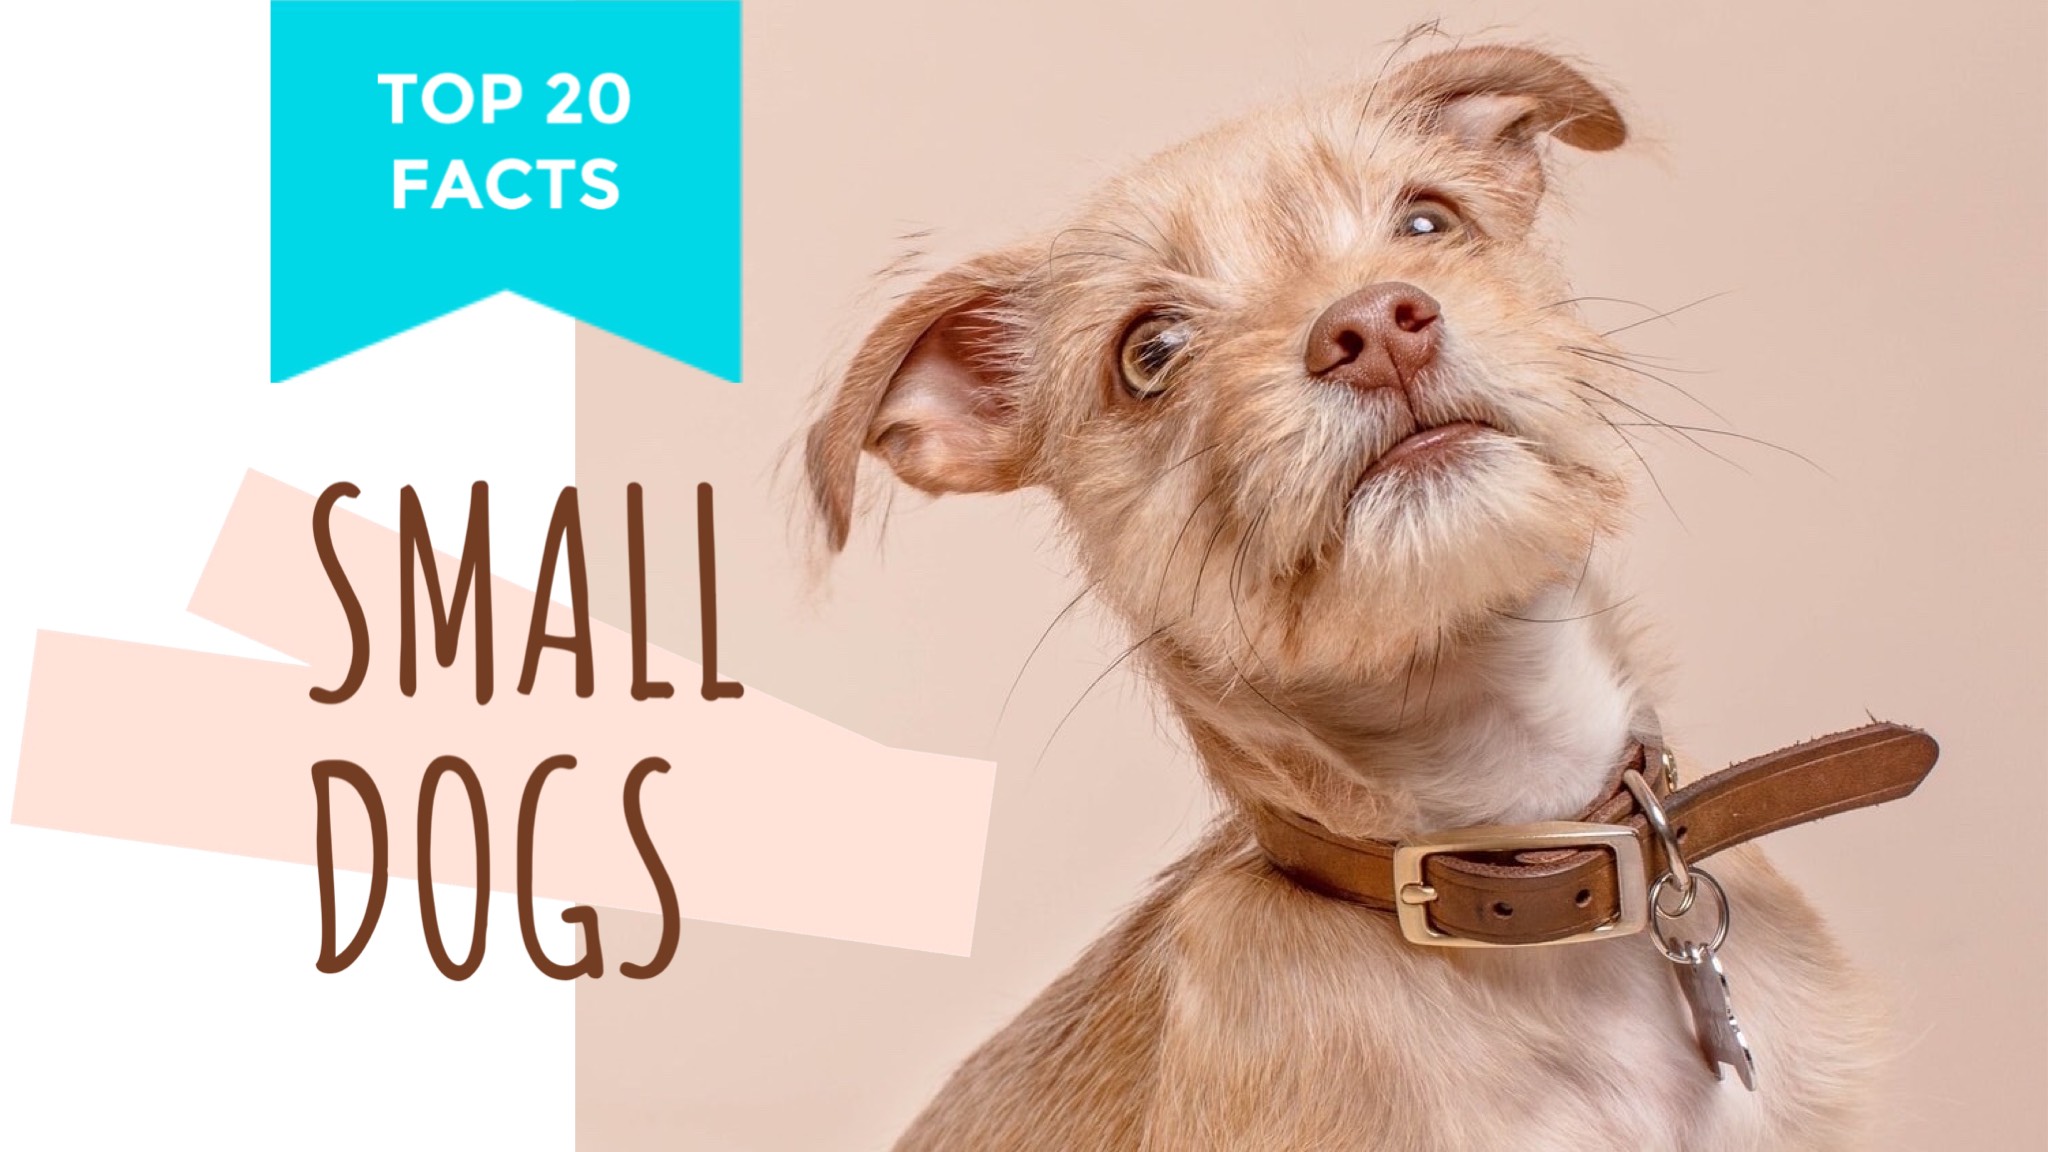 Facts about small dog pets youtube thumbnail template